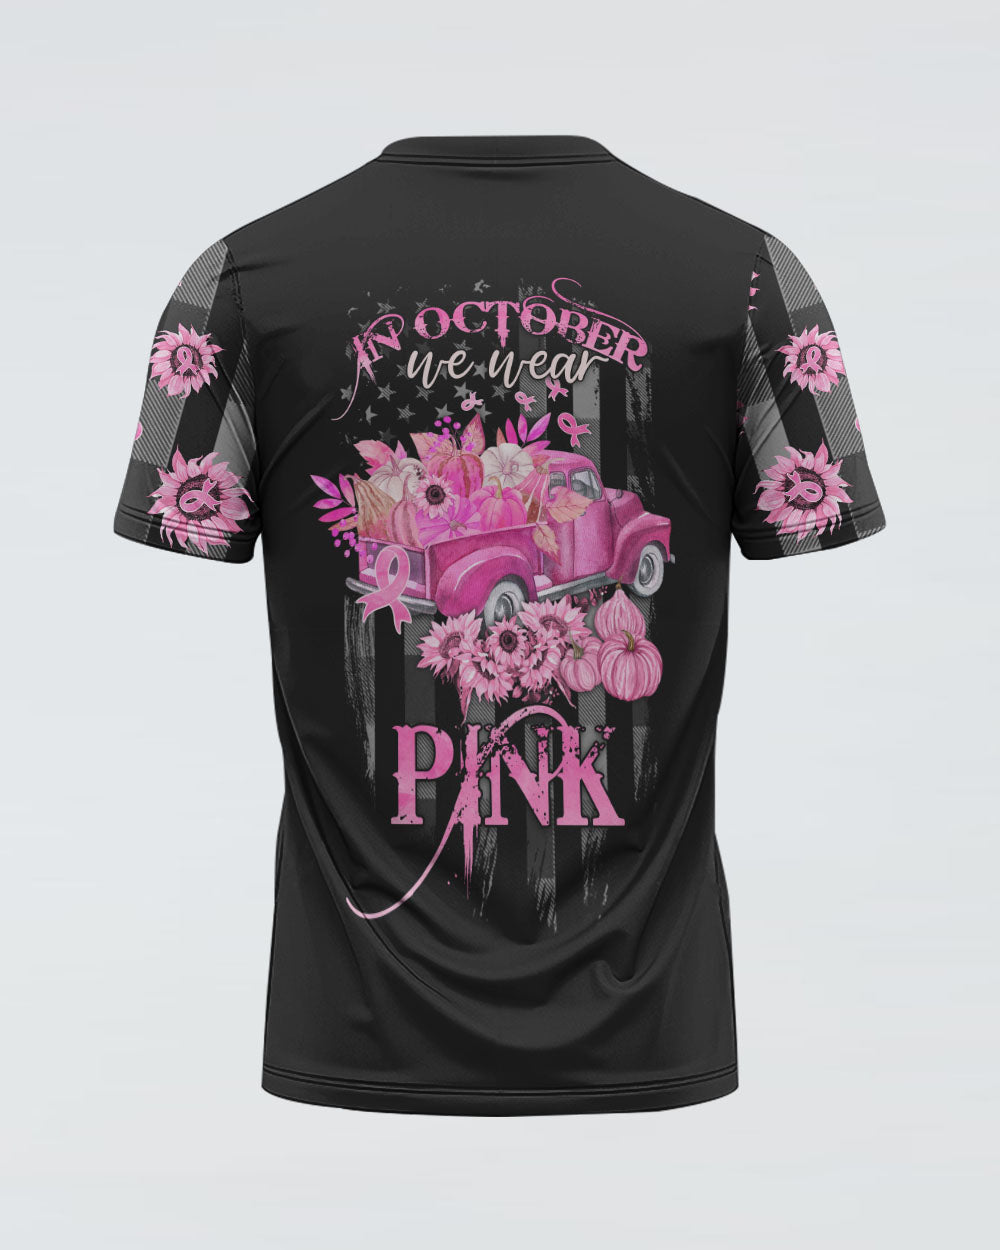 In October We Wear Pink Truck Flag Women's Breast Cancer Awareness Tshirt